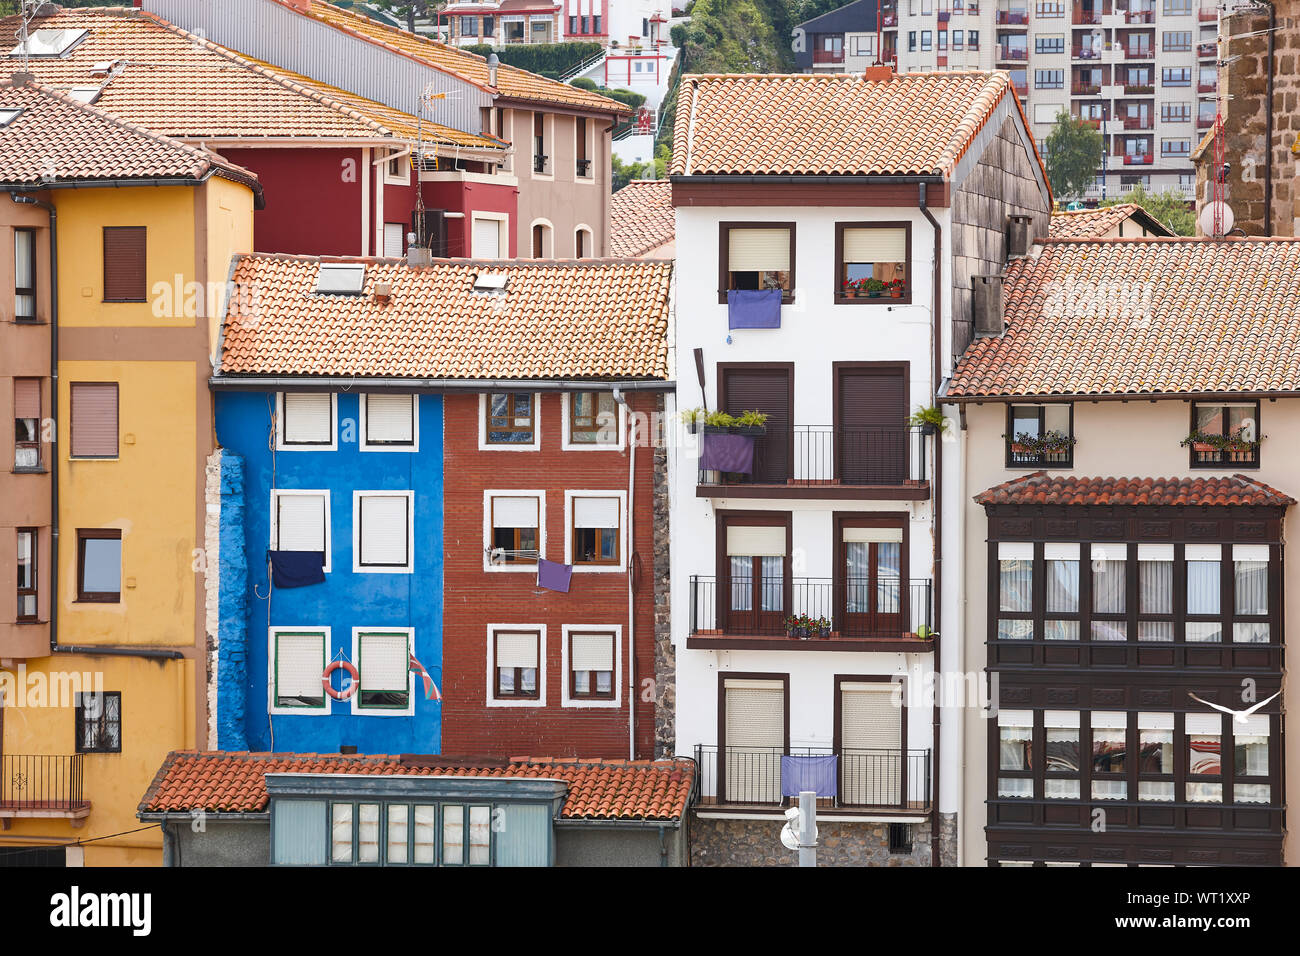 Traditional picturesque colorful buildings village of Bermeo. Basque country. Spain Stock Photo